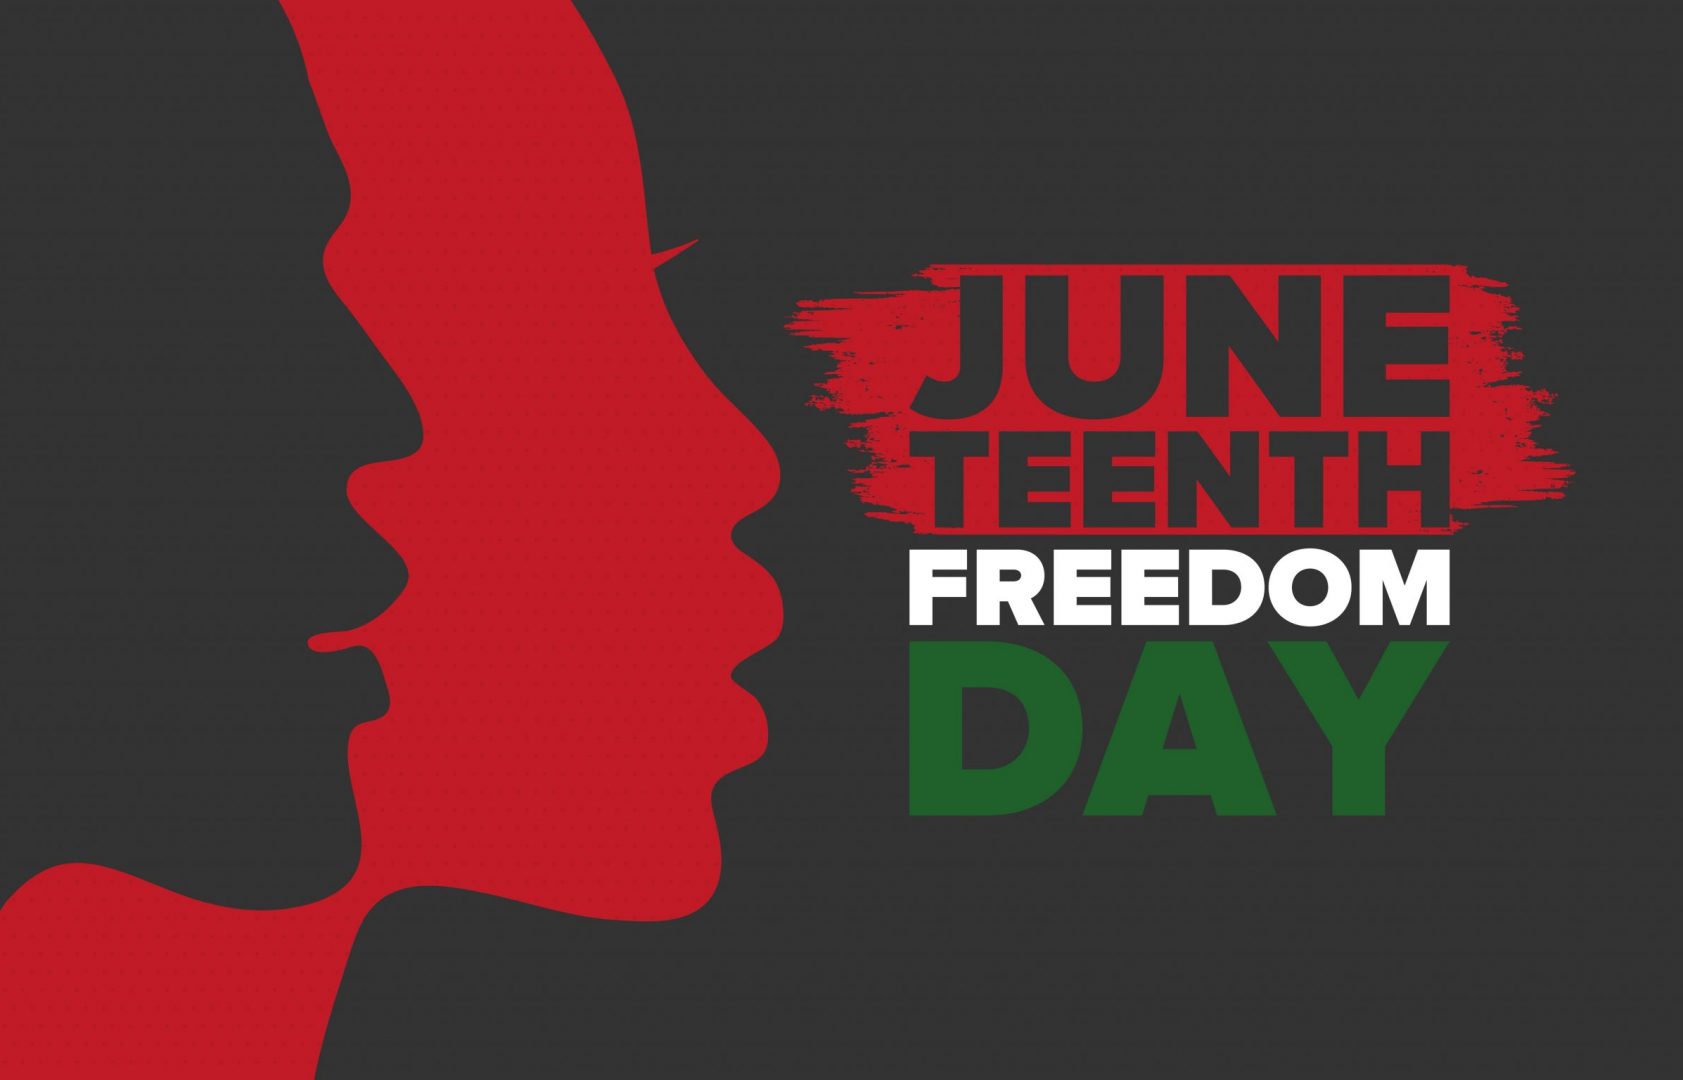 3 ways for Black families to establish their own Juneteenth celebration